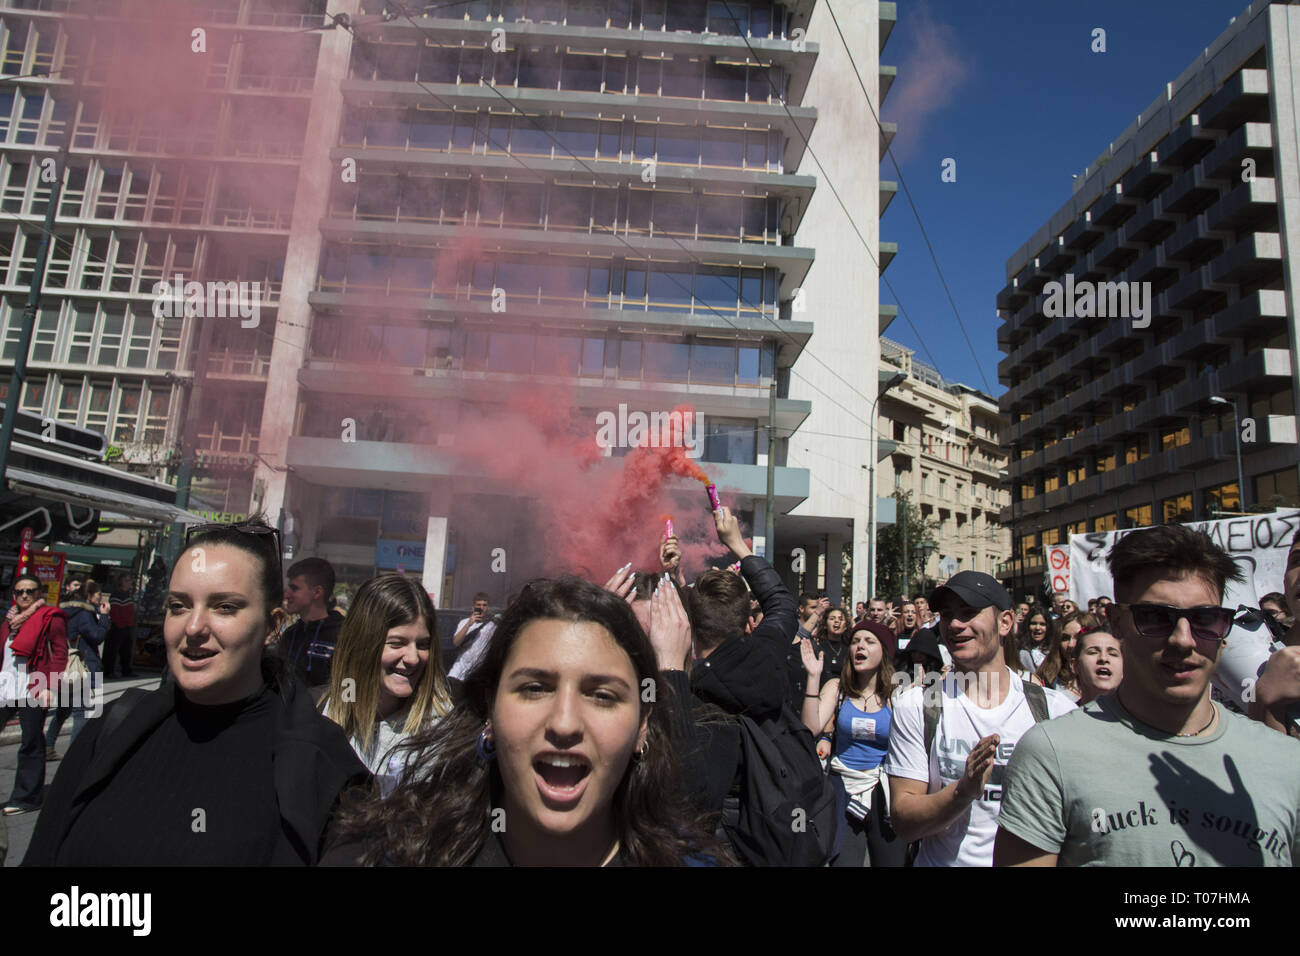 Athens, Greece. 18th Mar, 2019. Students rally holding banners and shout slogans against the government. A few thousands high school students took to the streets to demonstrate against upcoming reforms in education, which they claim will drive them to seek for paid supplementary education putting an additional financial burden to their parents. Credit: Nikolas Georgiou/ZUMA Wire/Alamy Live News Stock Photo